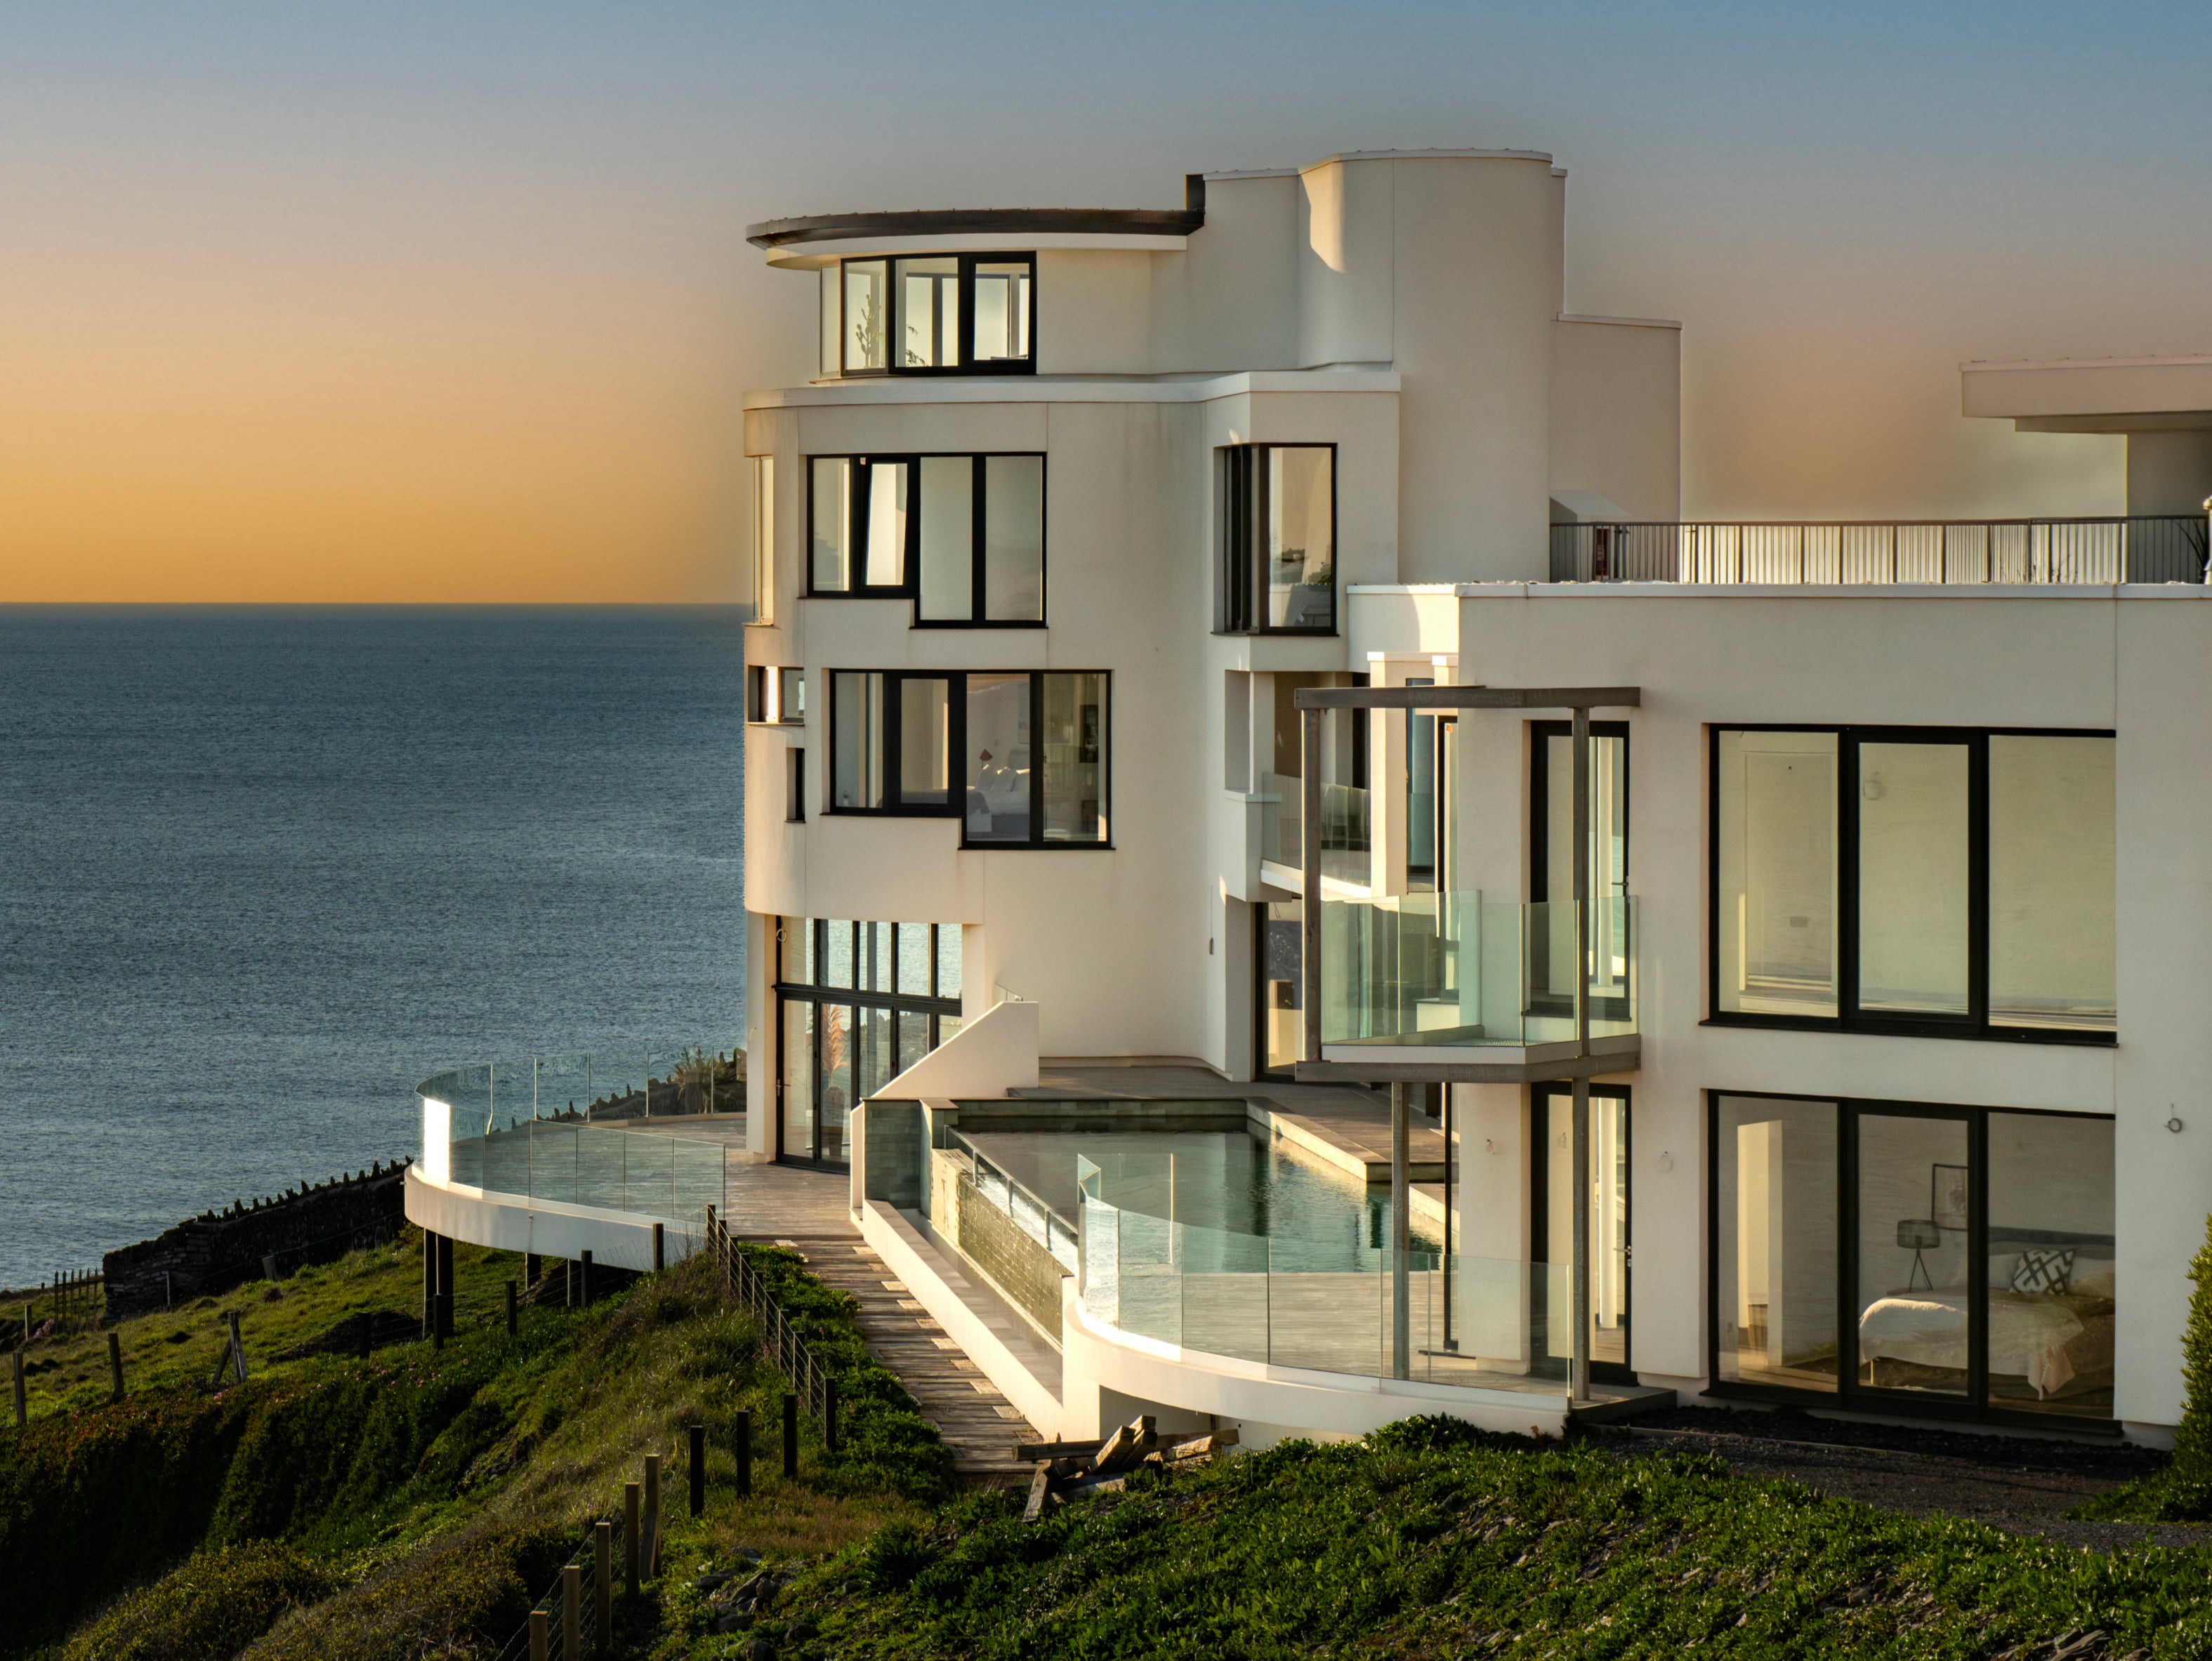 The house sits on the cliff edge